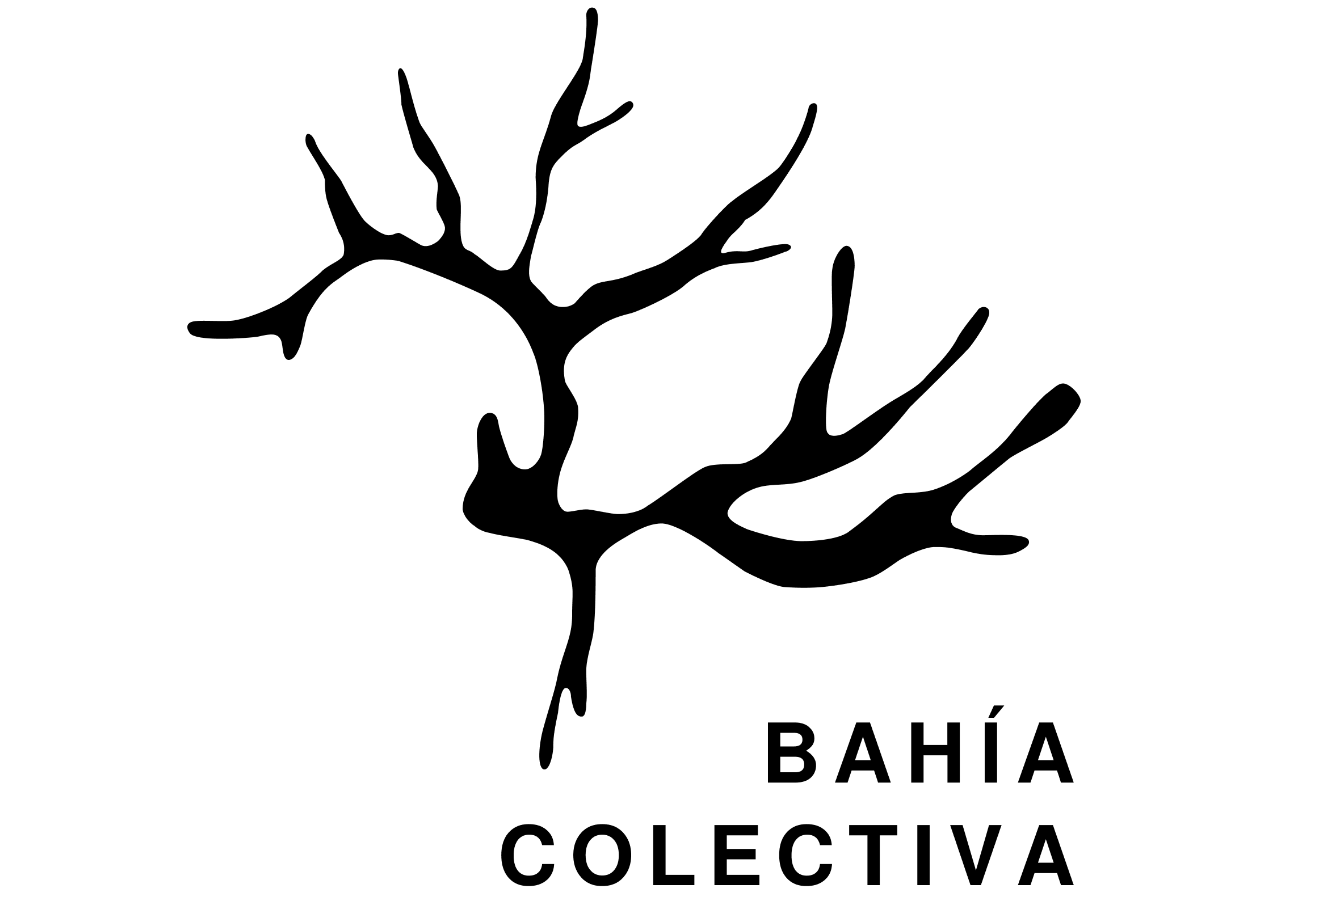 An abstract black tree with no leaves. Underneath the tree there is text that says, "Bahia Colectiva"